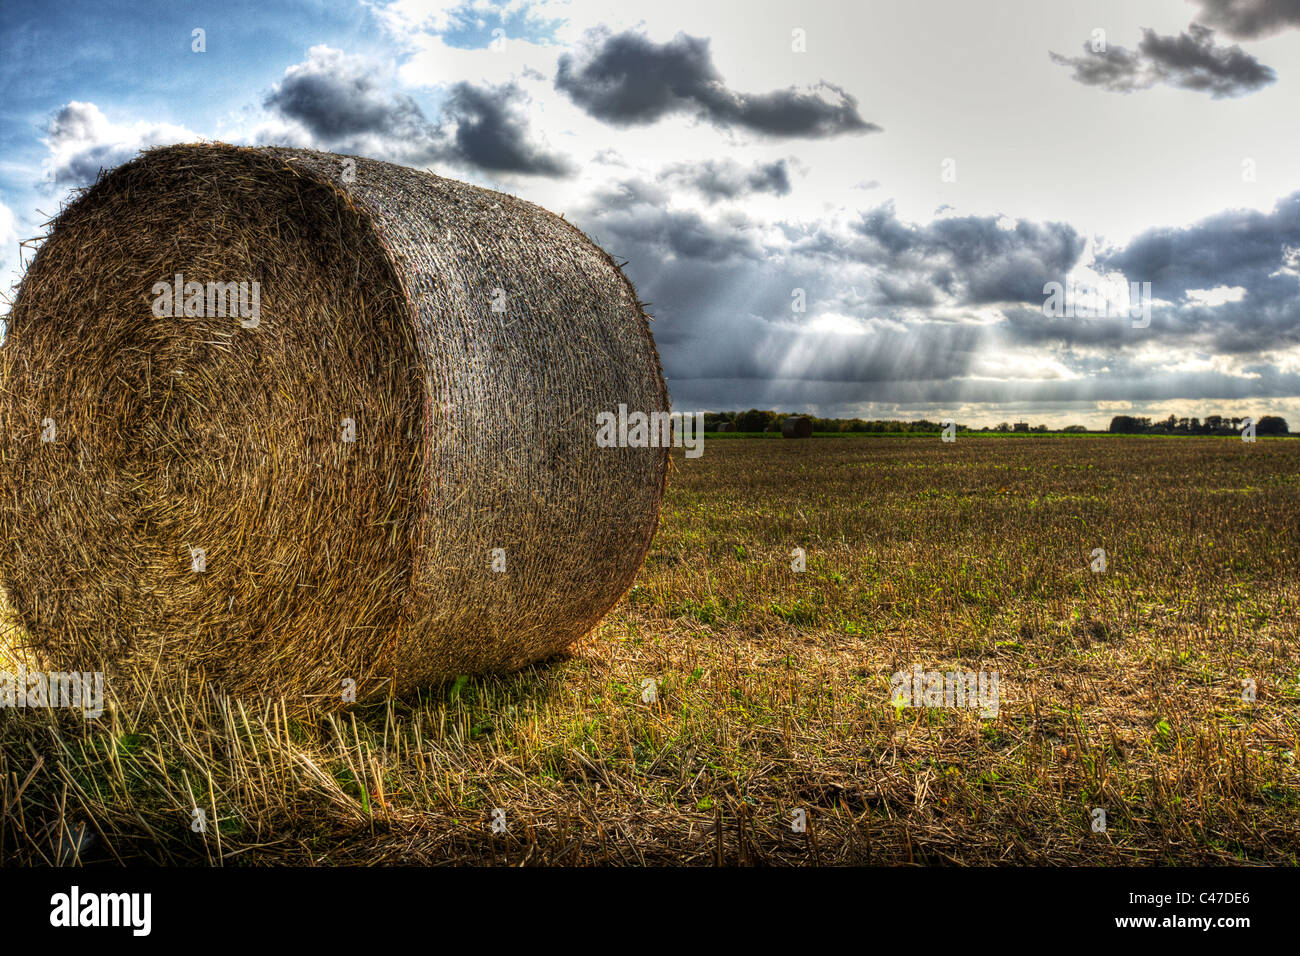 Roll of hay and straw in farmers field in Louth, Lincolnshire Wolds, waiting collection Stock Photo